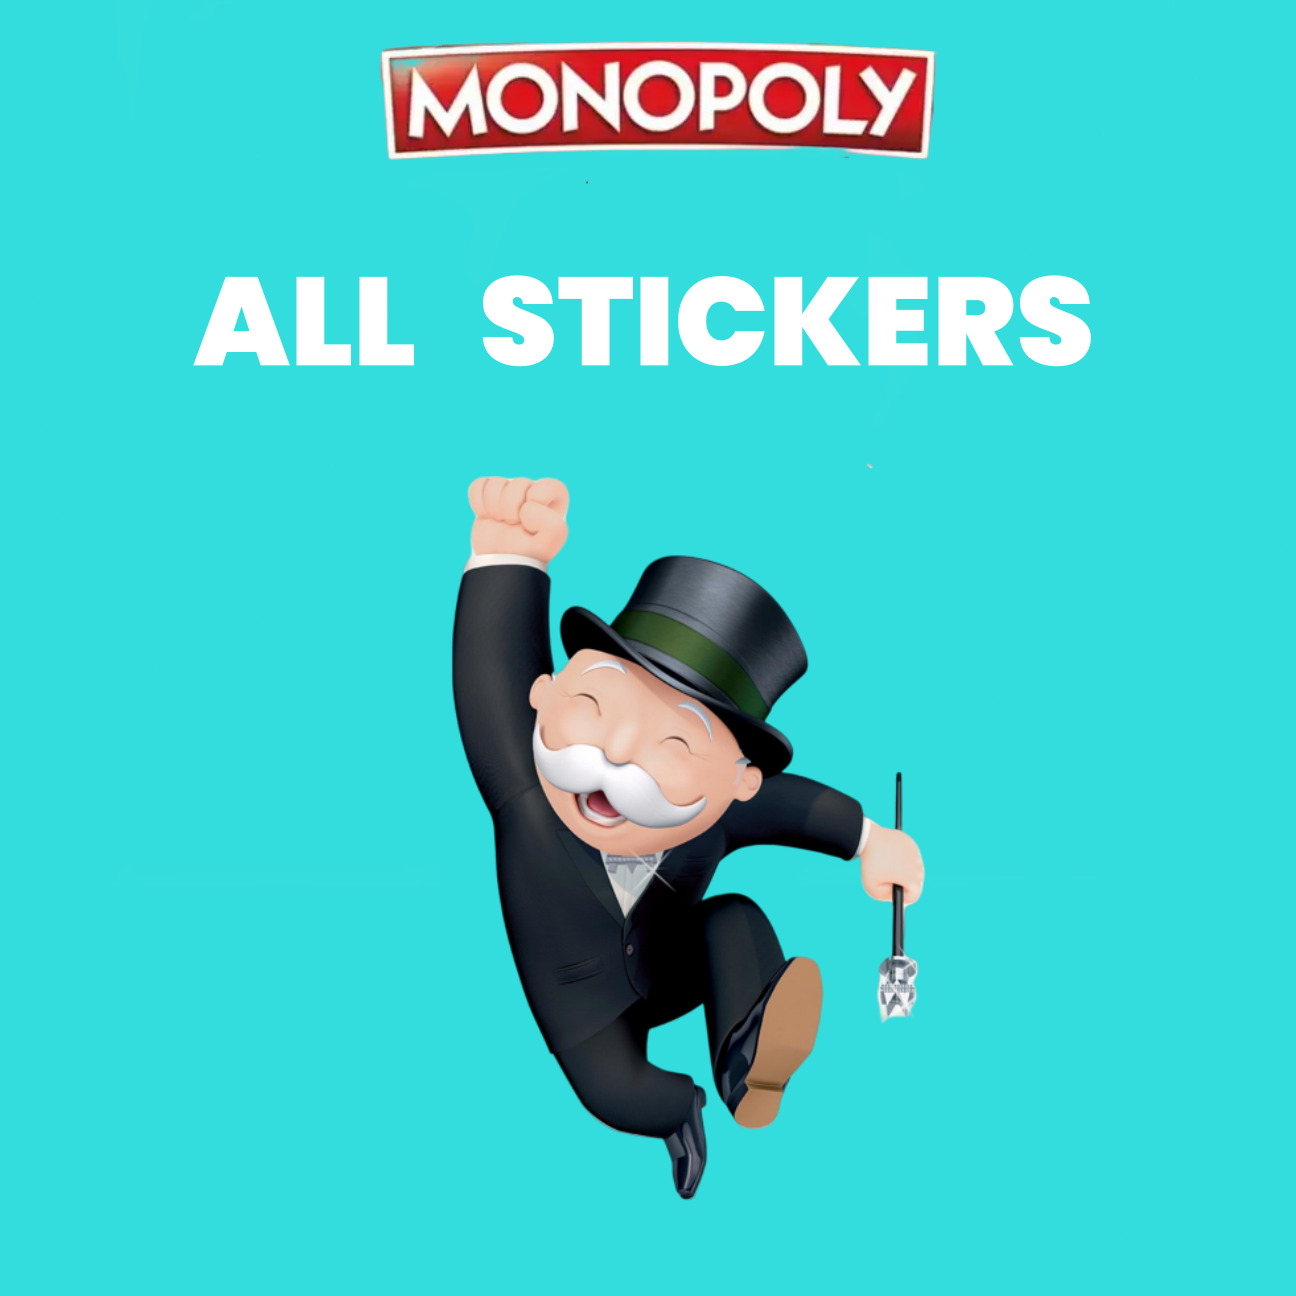 Monopoly GO 1-5 Stars Stickers⭐️⭐️⭐️⭐️⭐️ All Stickers⚡Fast Delivery⚡Cheap🔥🔥🔥